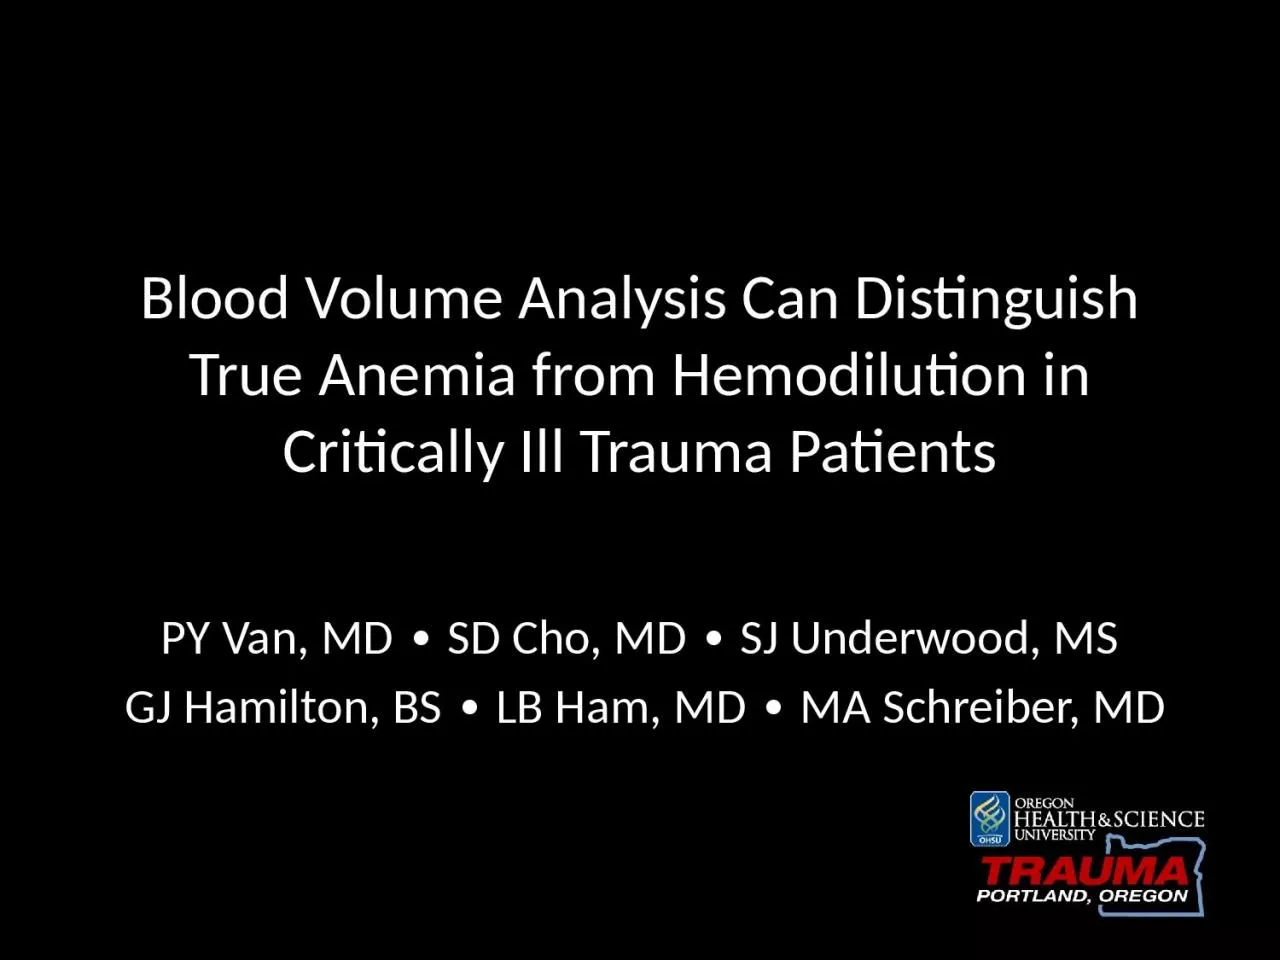 Blood Volume Analysis Can Distinguish True Anemia from Hemodilution in Critically Ill